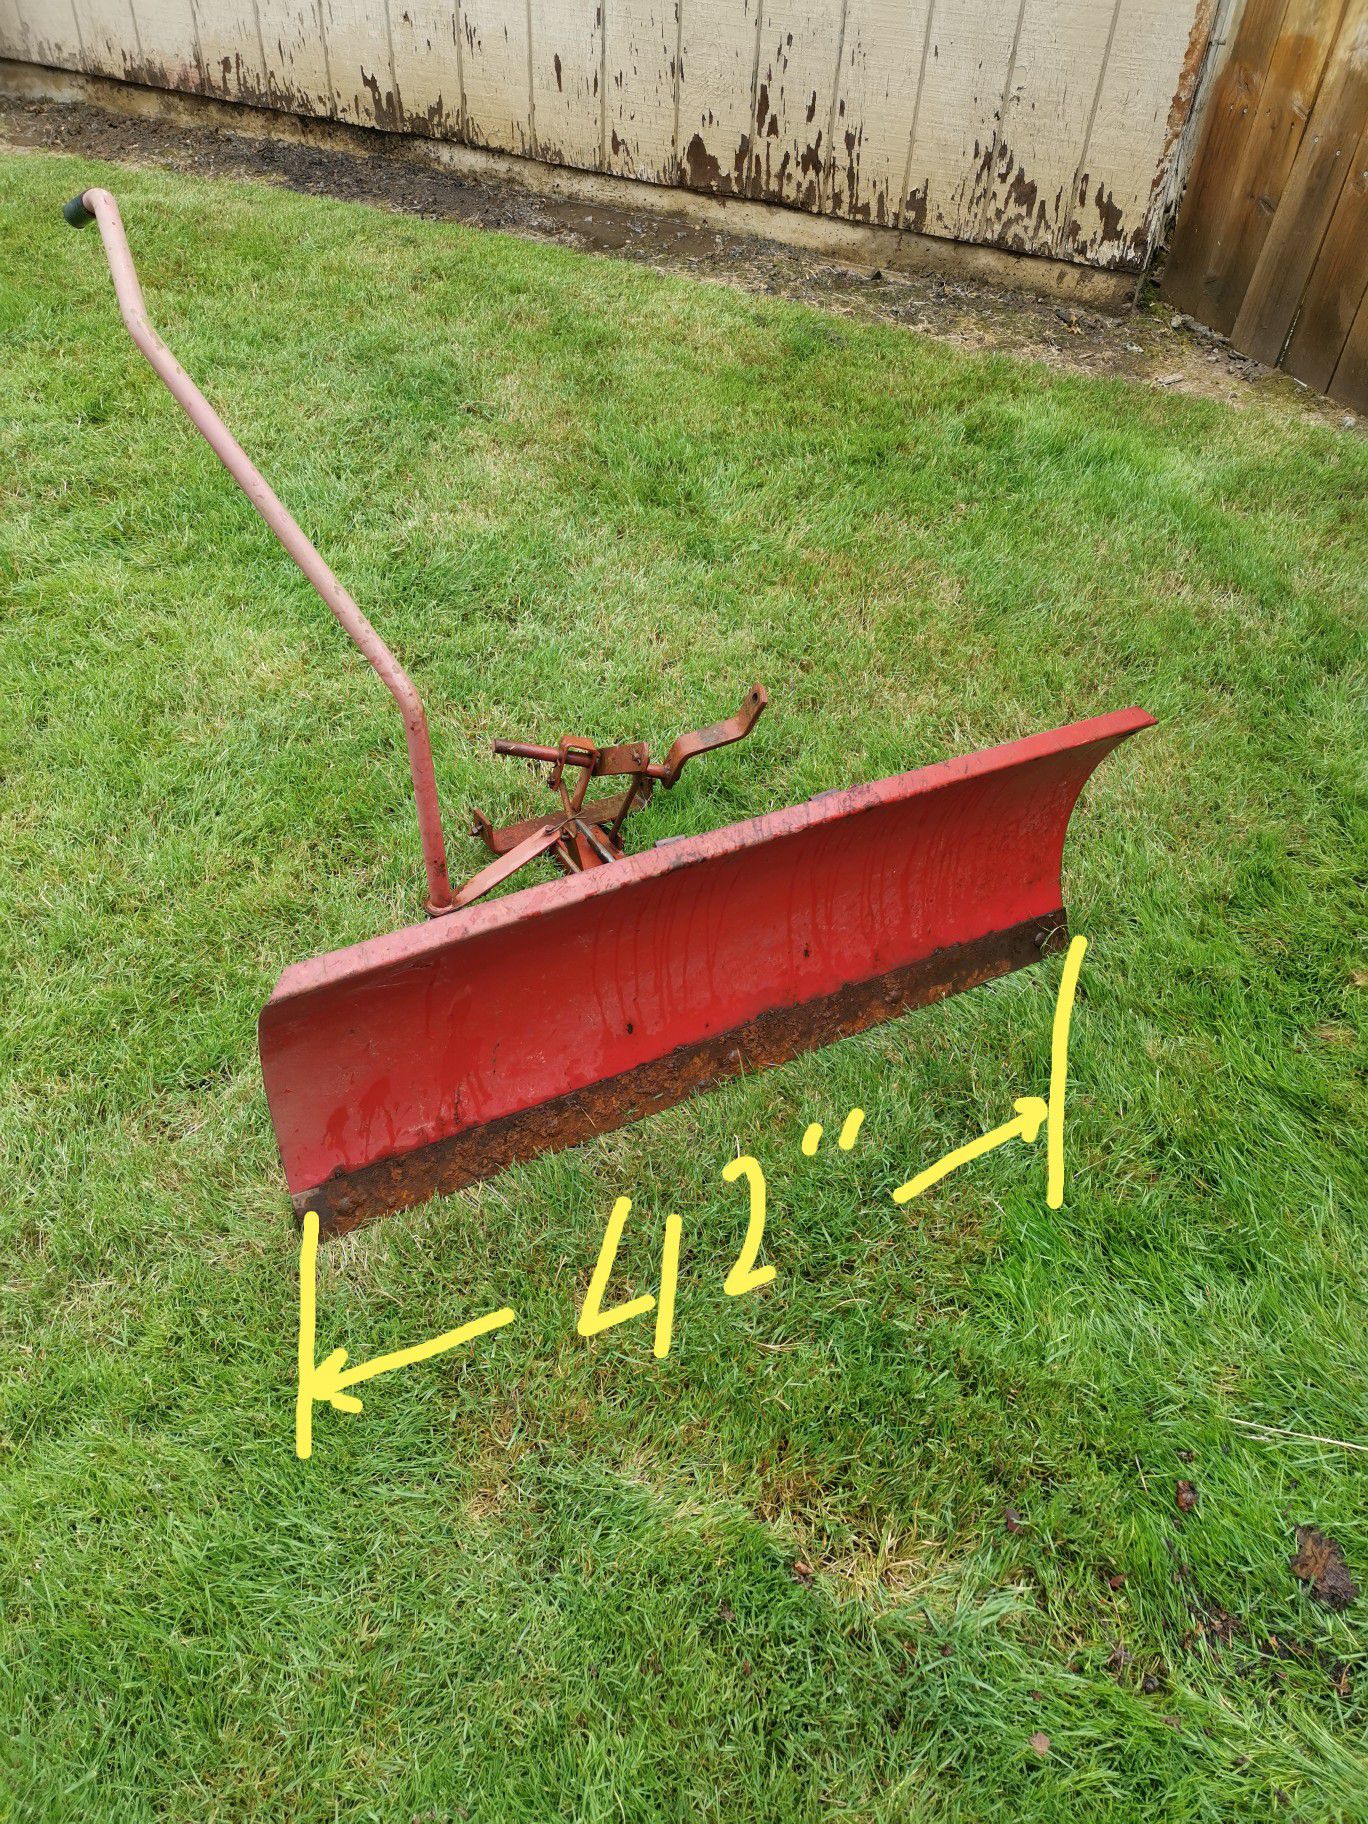 Tractor/Lawn Mower grading blade/snow plow